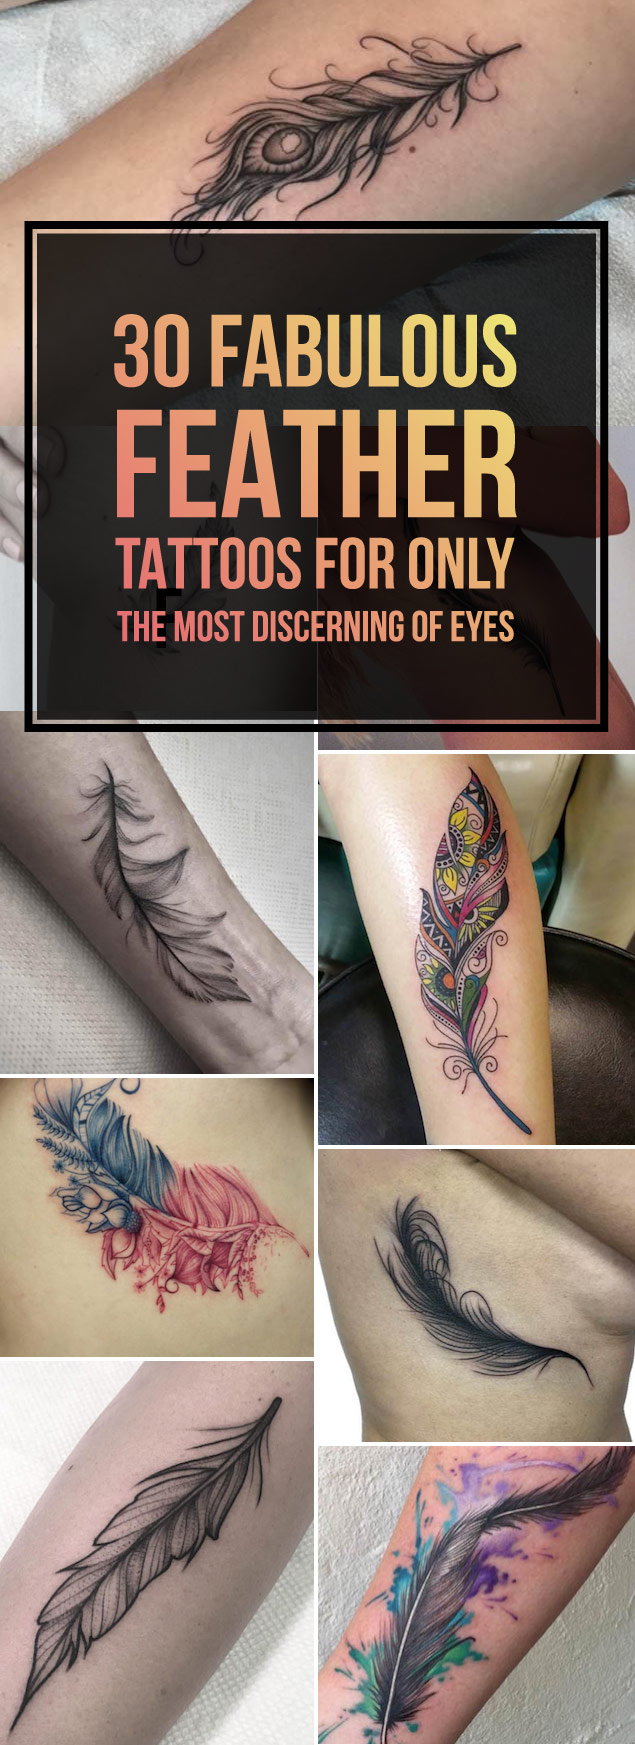 30 Fabulous Feather Tattoo Designs